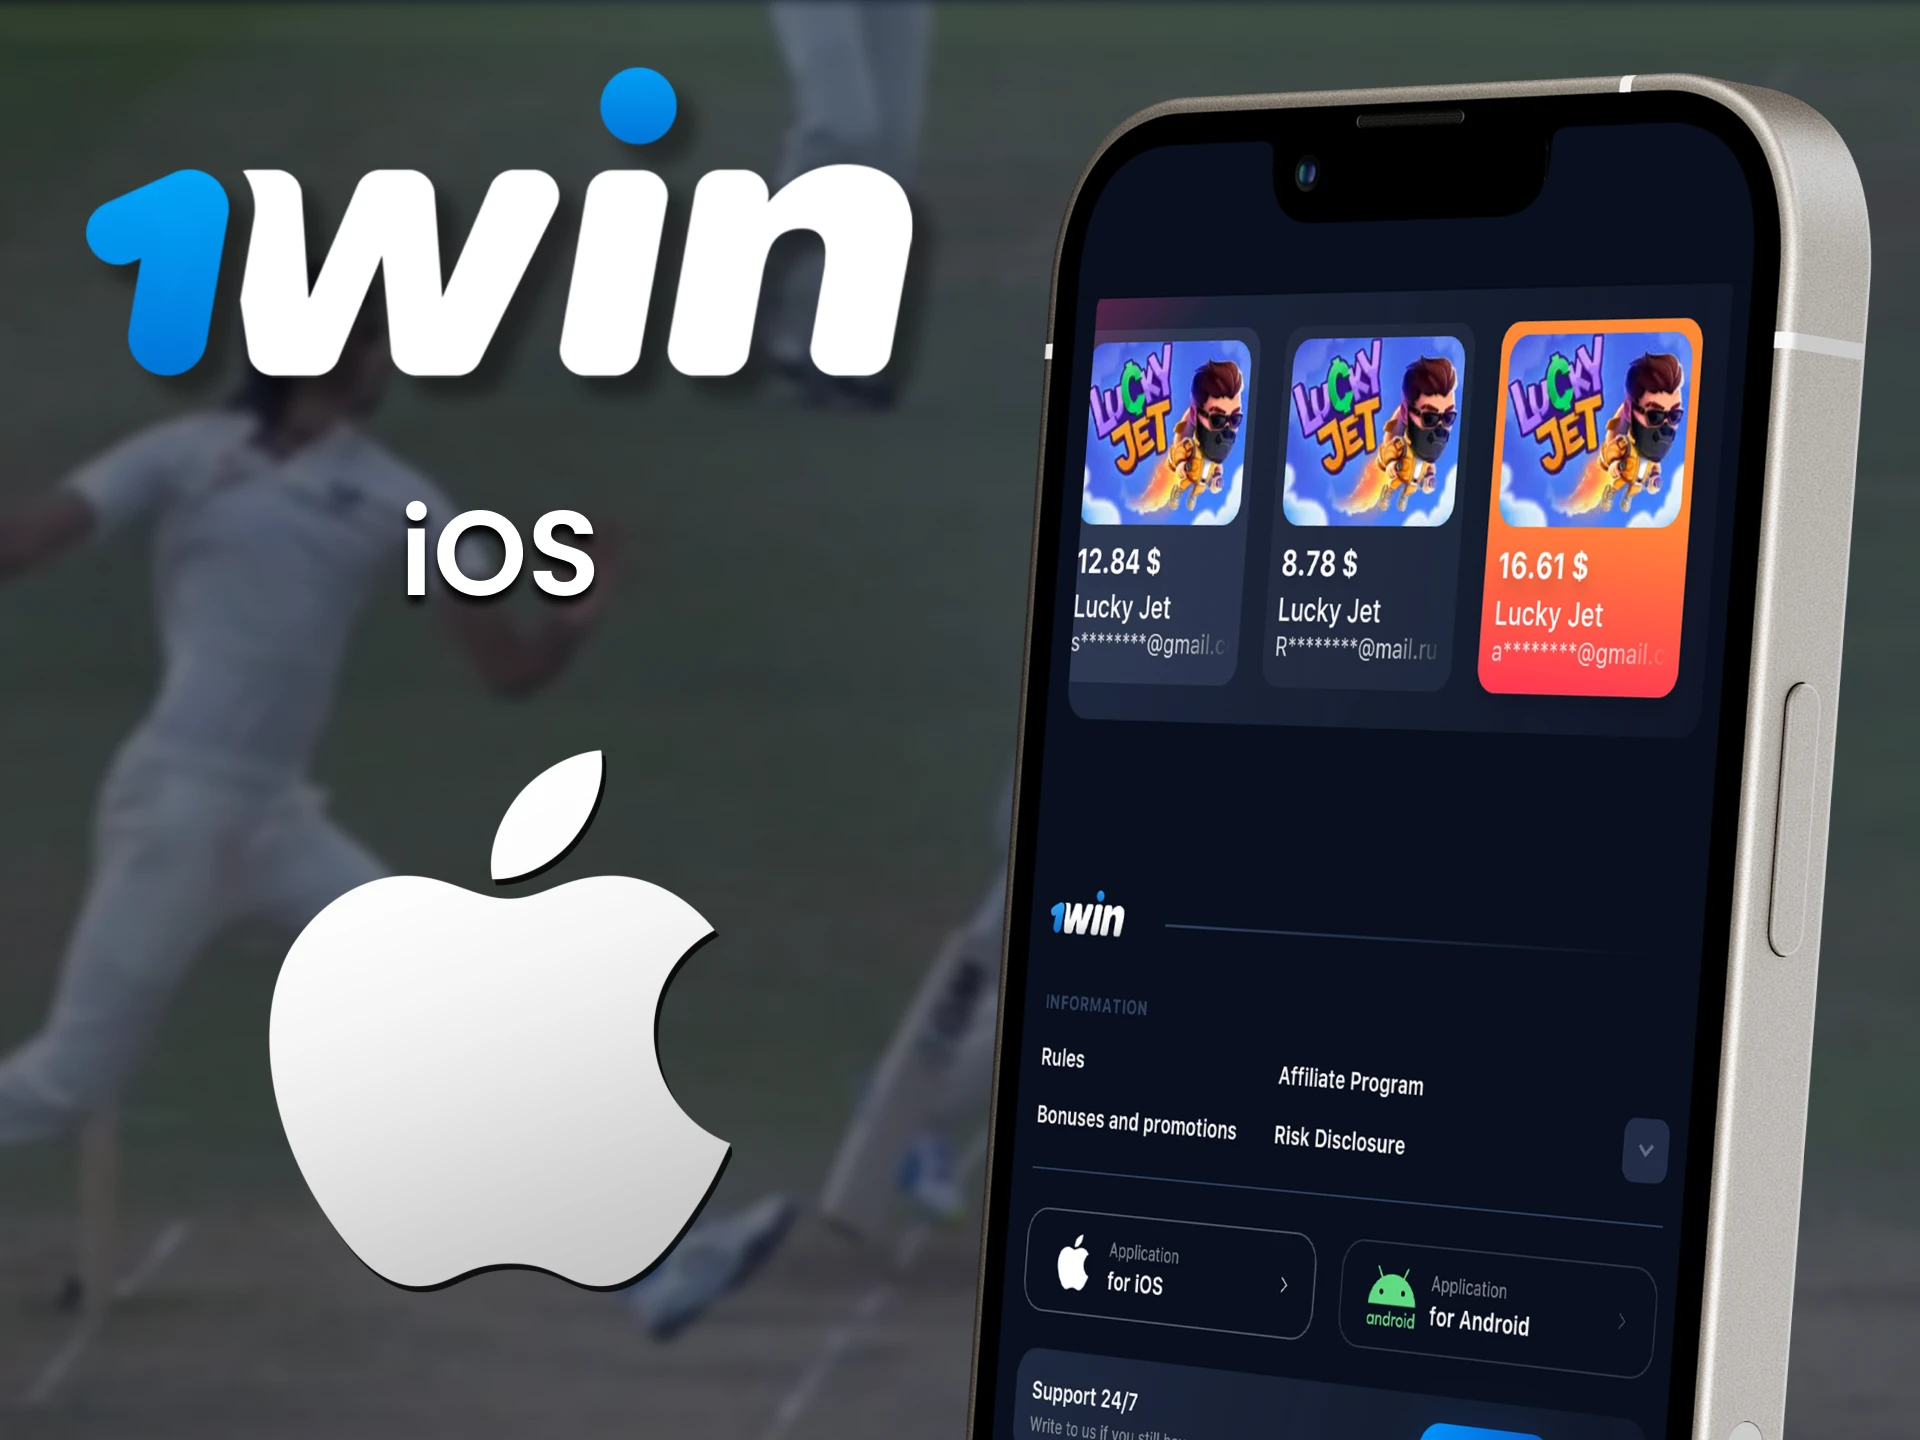 Download the setup file and Install 1win app on your iOS device.